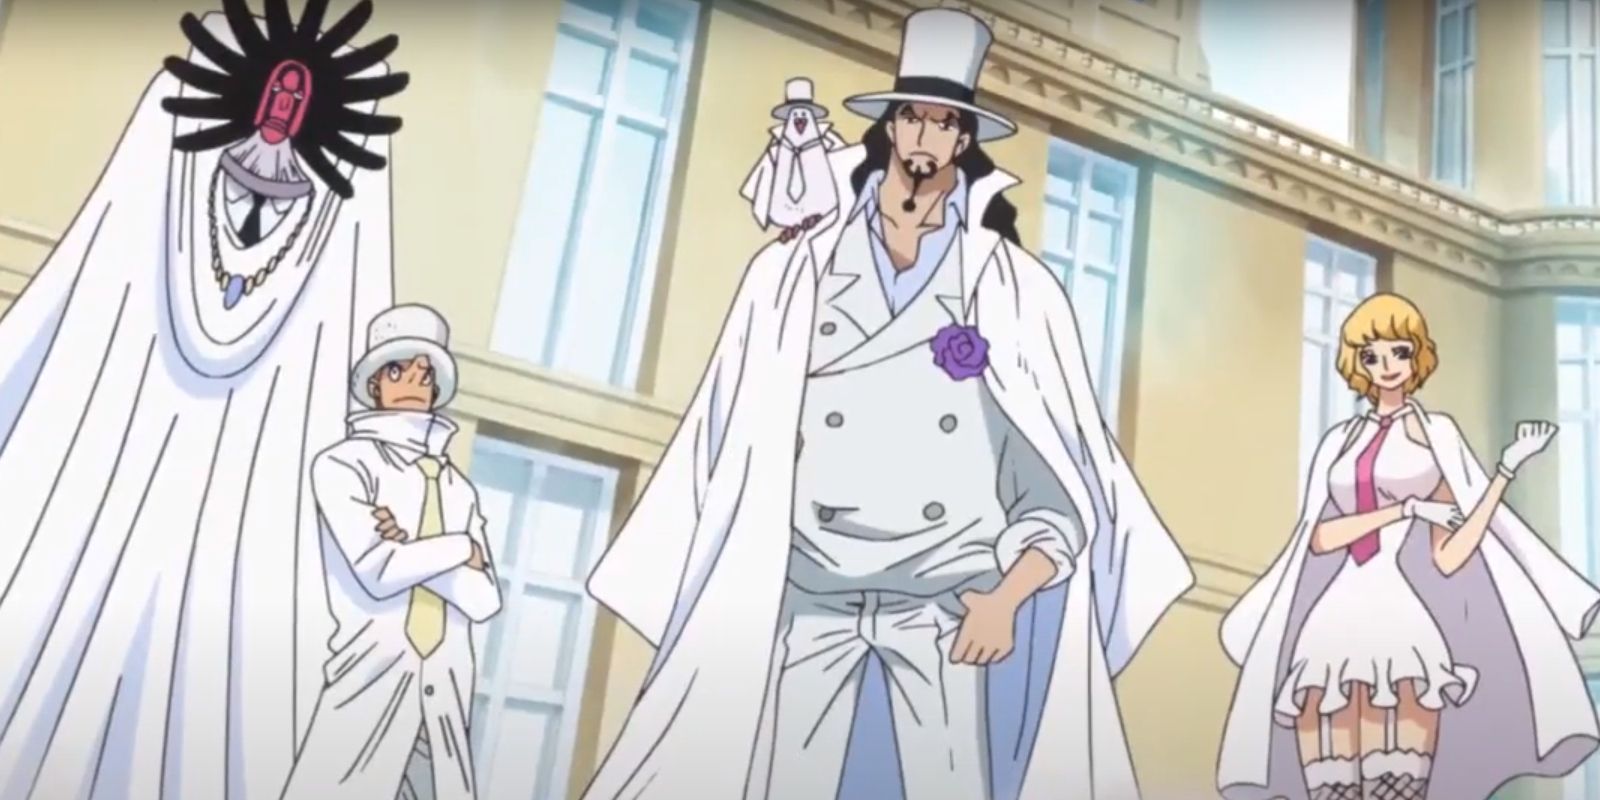 One Piece's Rob Lucci, Kaku, Stussy, and Gismonda gather as CP0 at Mary Geoise